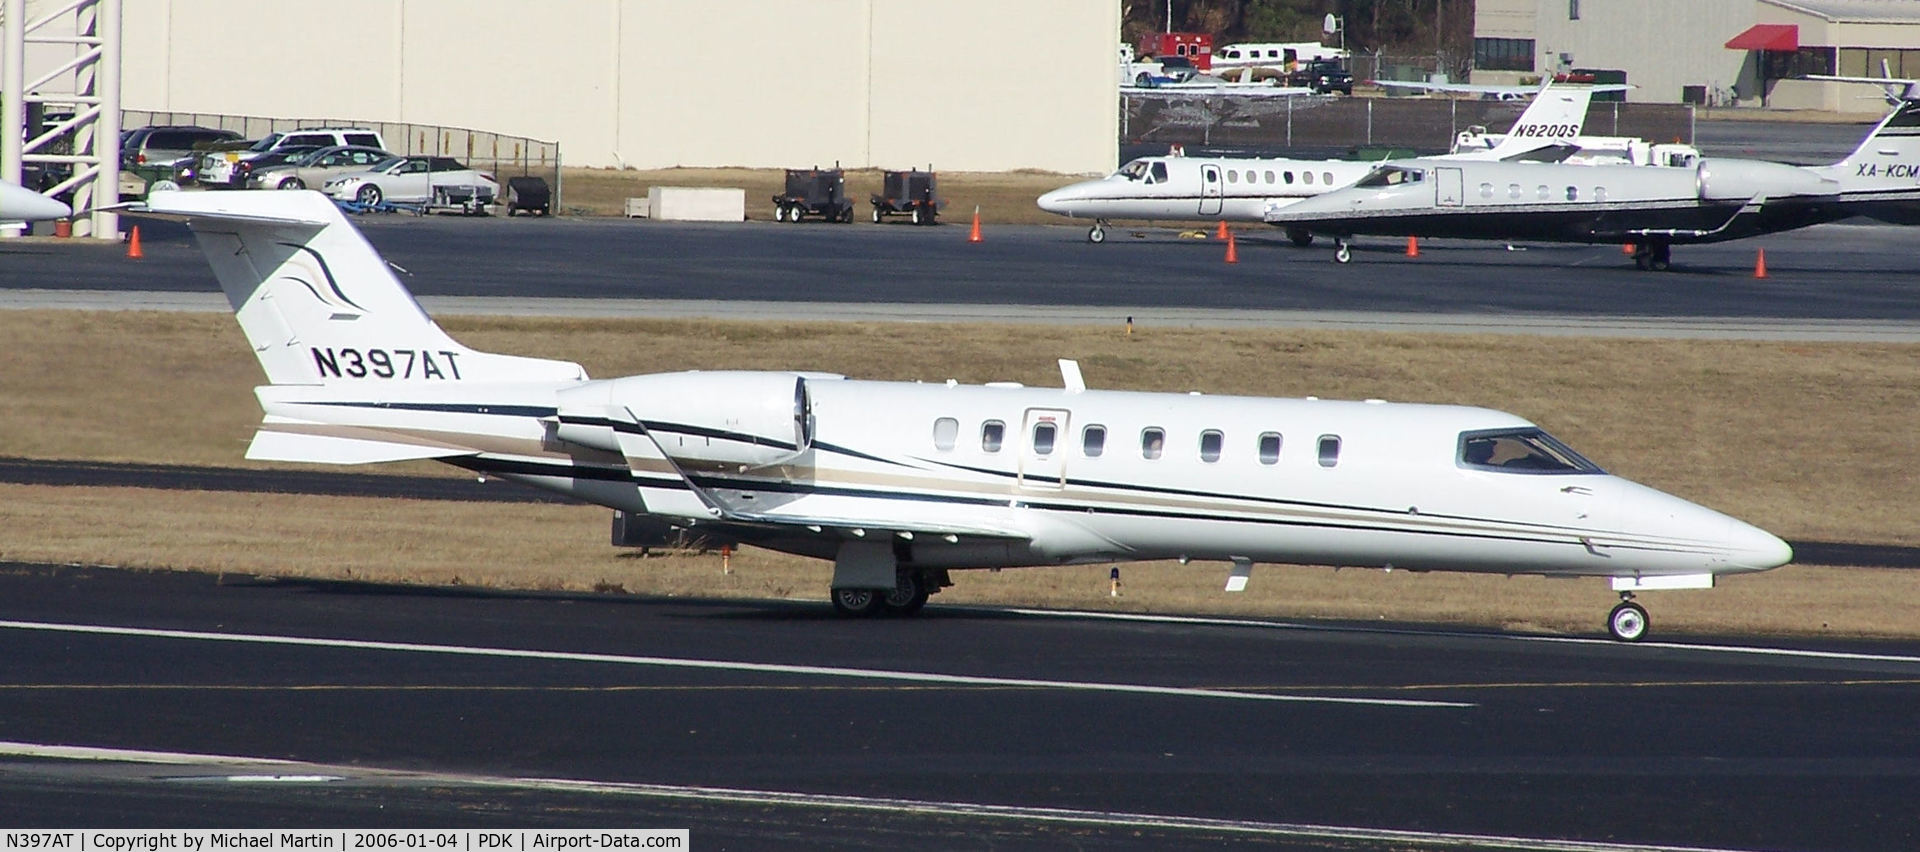 N397AT, 2000 Learjet Inc 45 C/N 105, Taxing to 20L